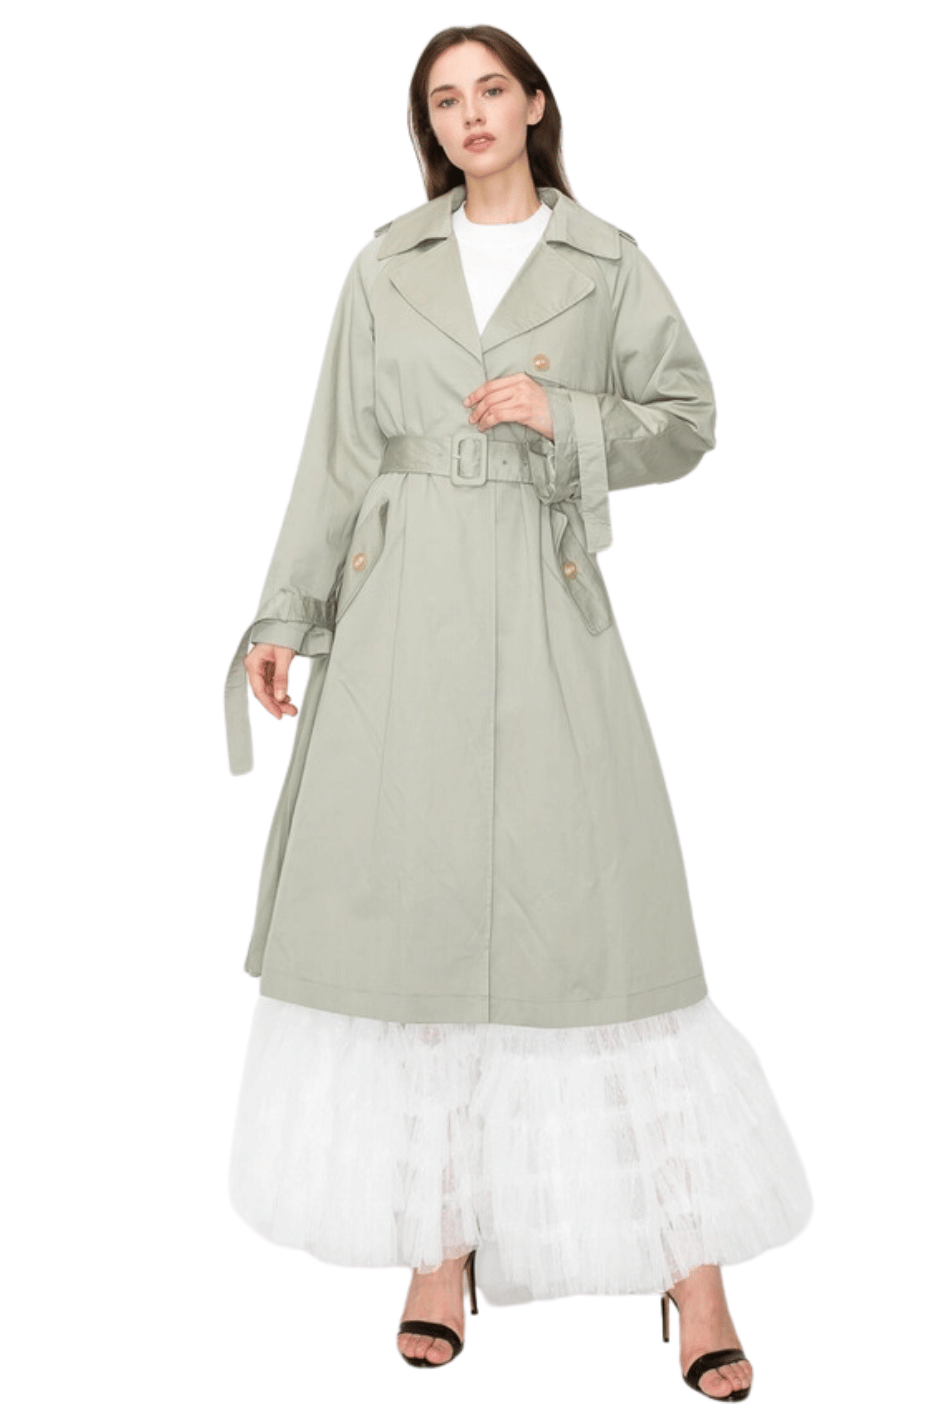 Parisian Pleated Trench Coat - Expressive Collective CO.